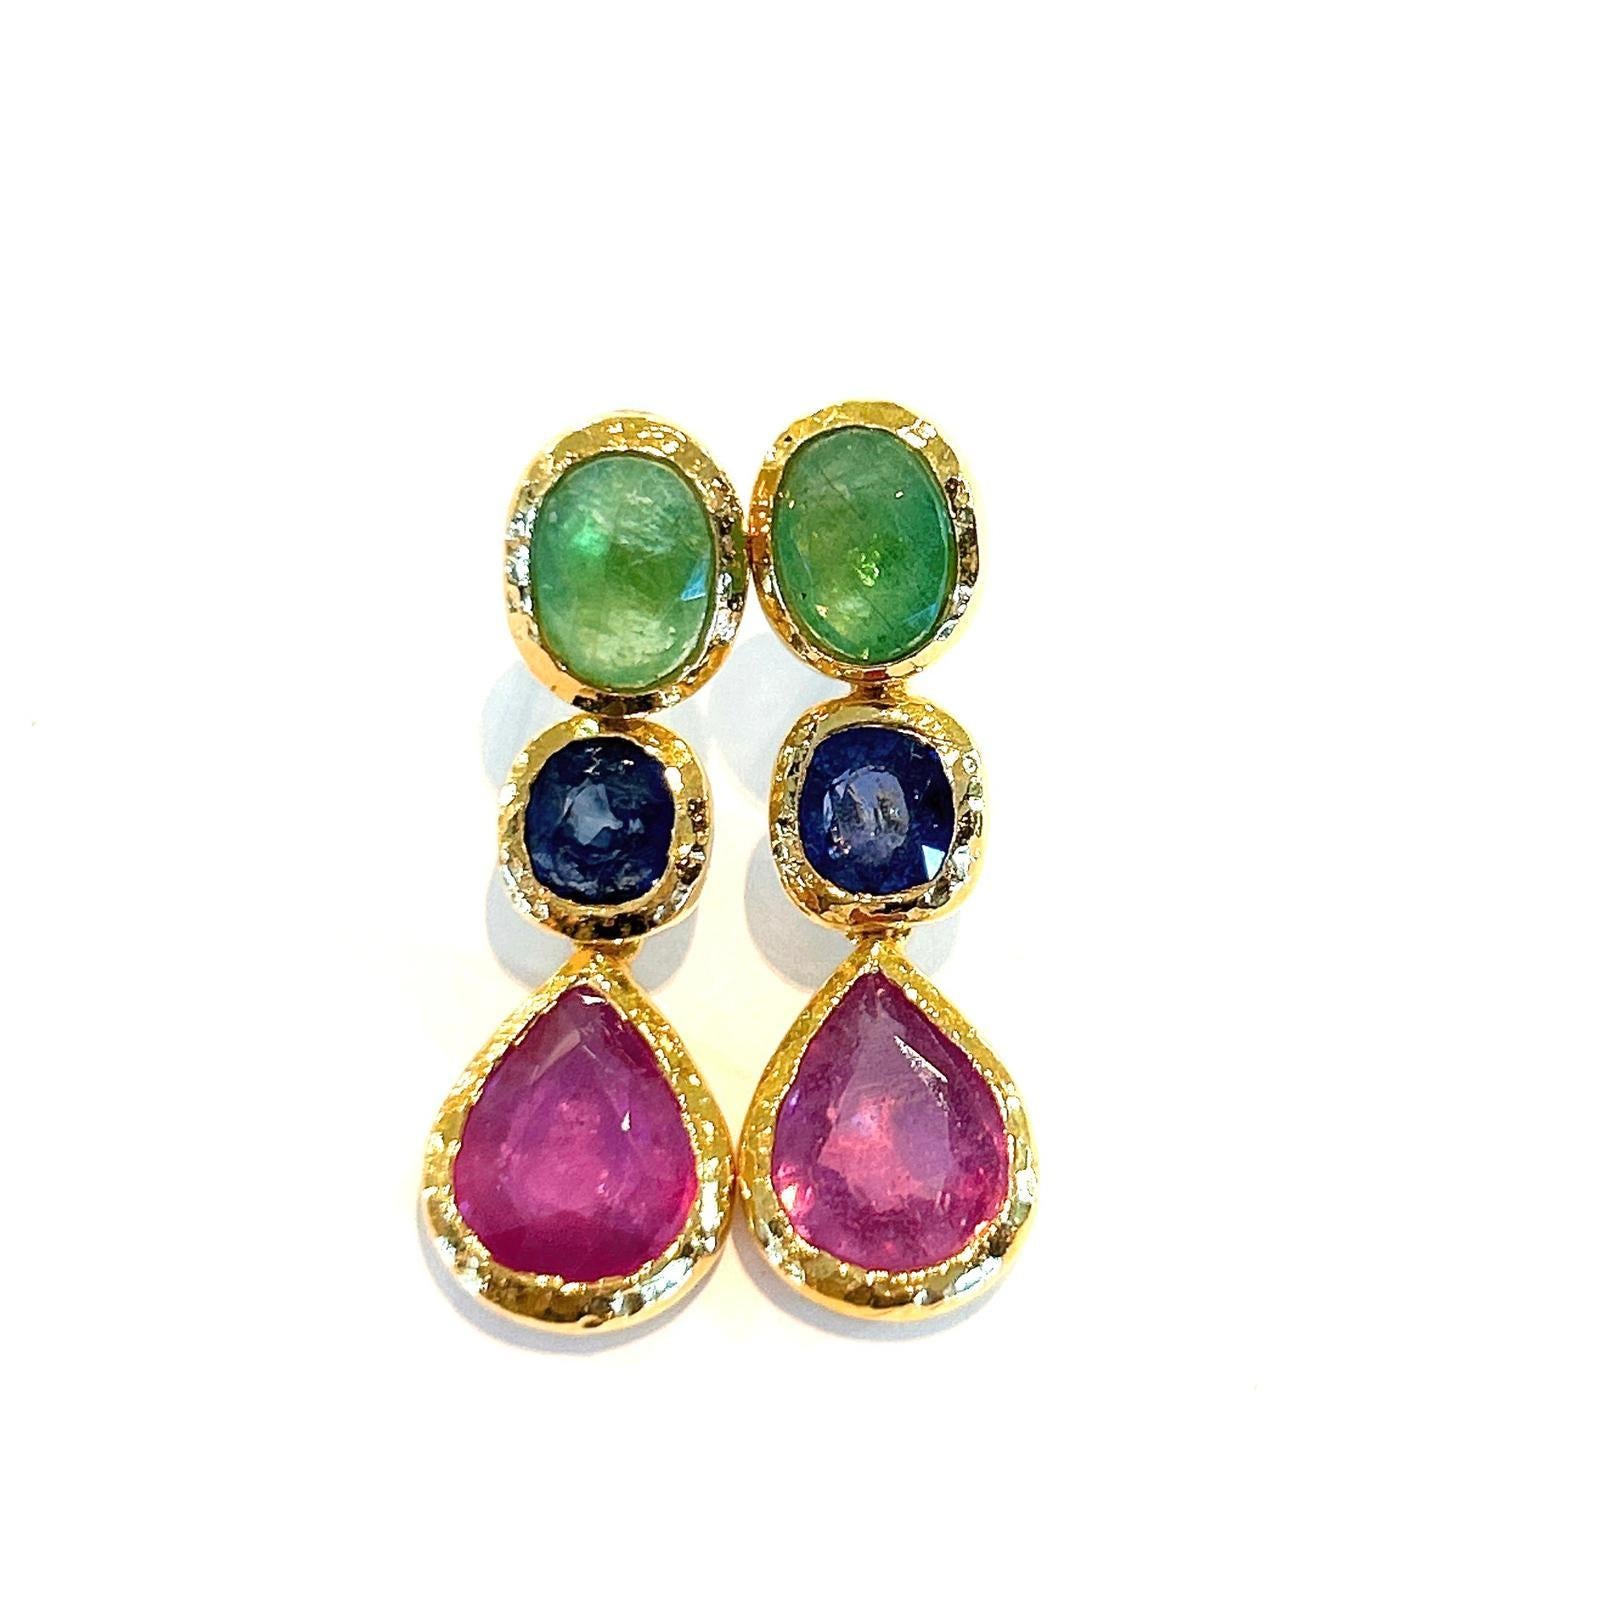 Bochic “Capri” Emerald, Ruby & Sapphire Earrings Set in 22k Gold & Silver In New Condition For Sale In New York, NY